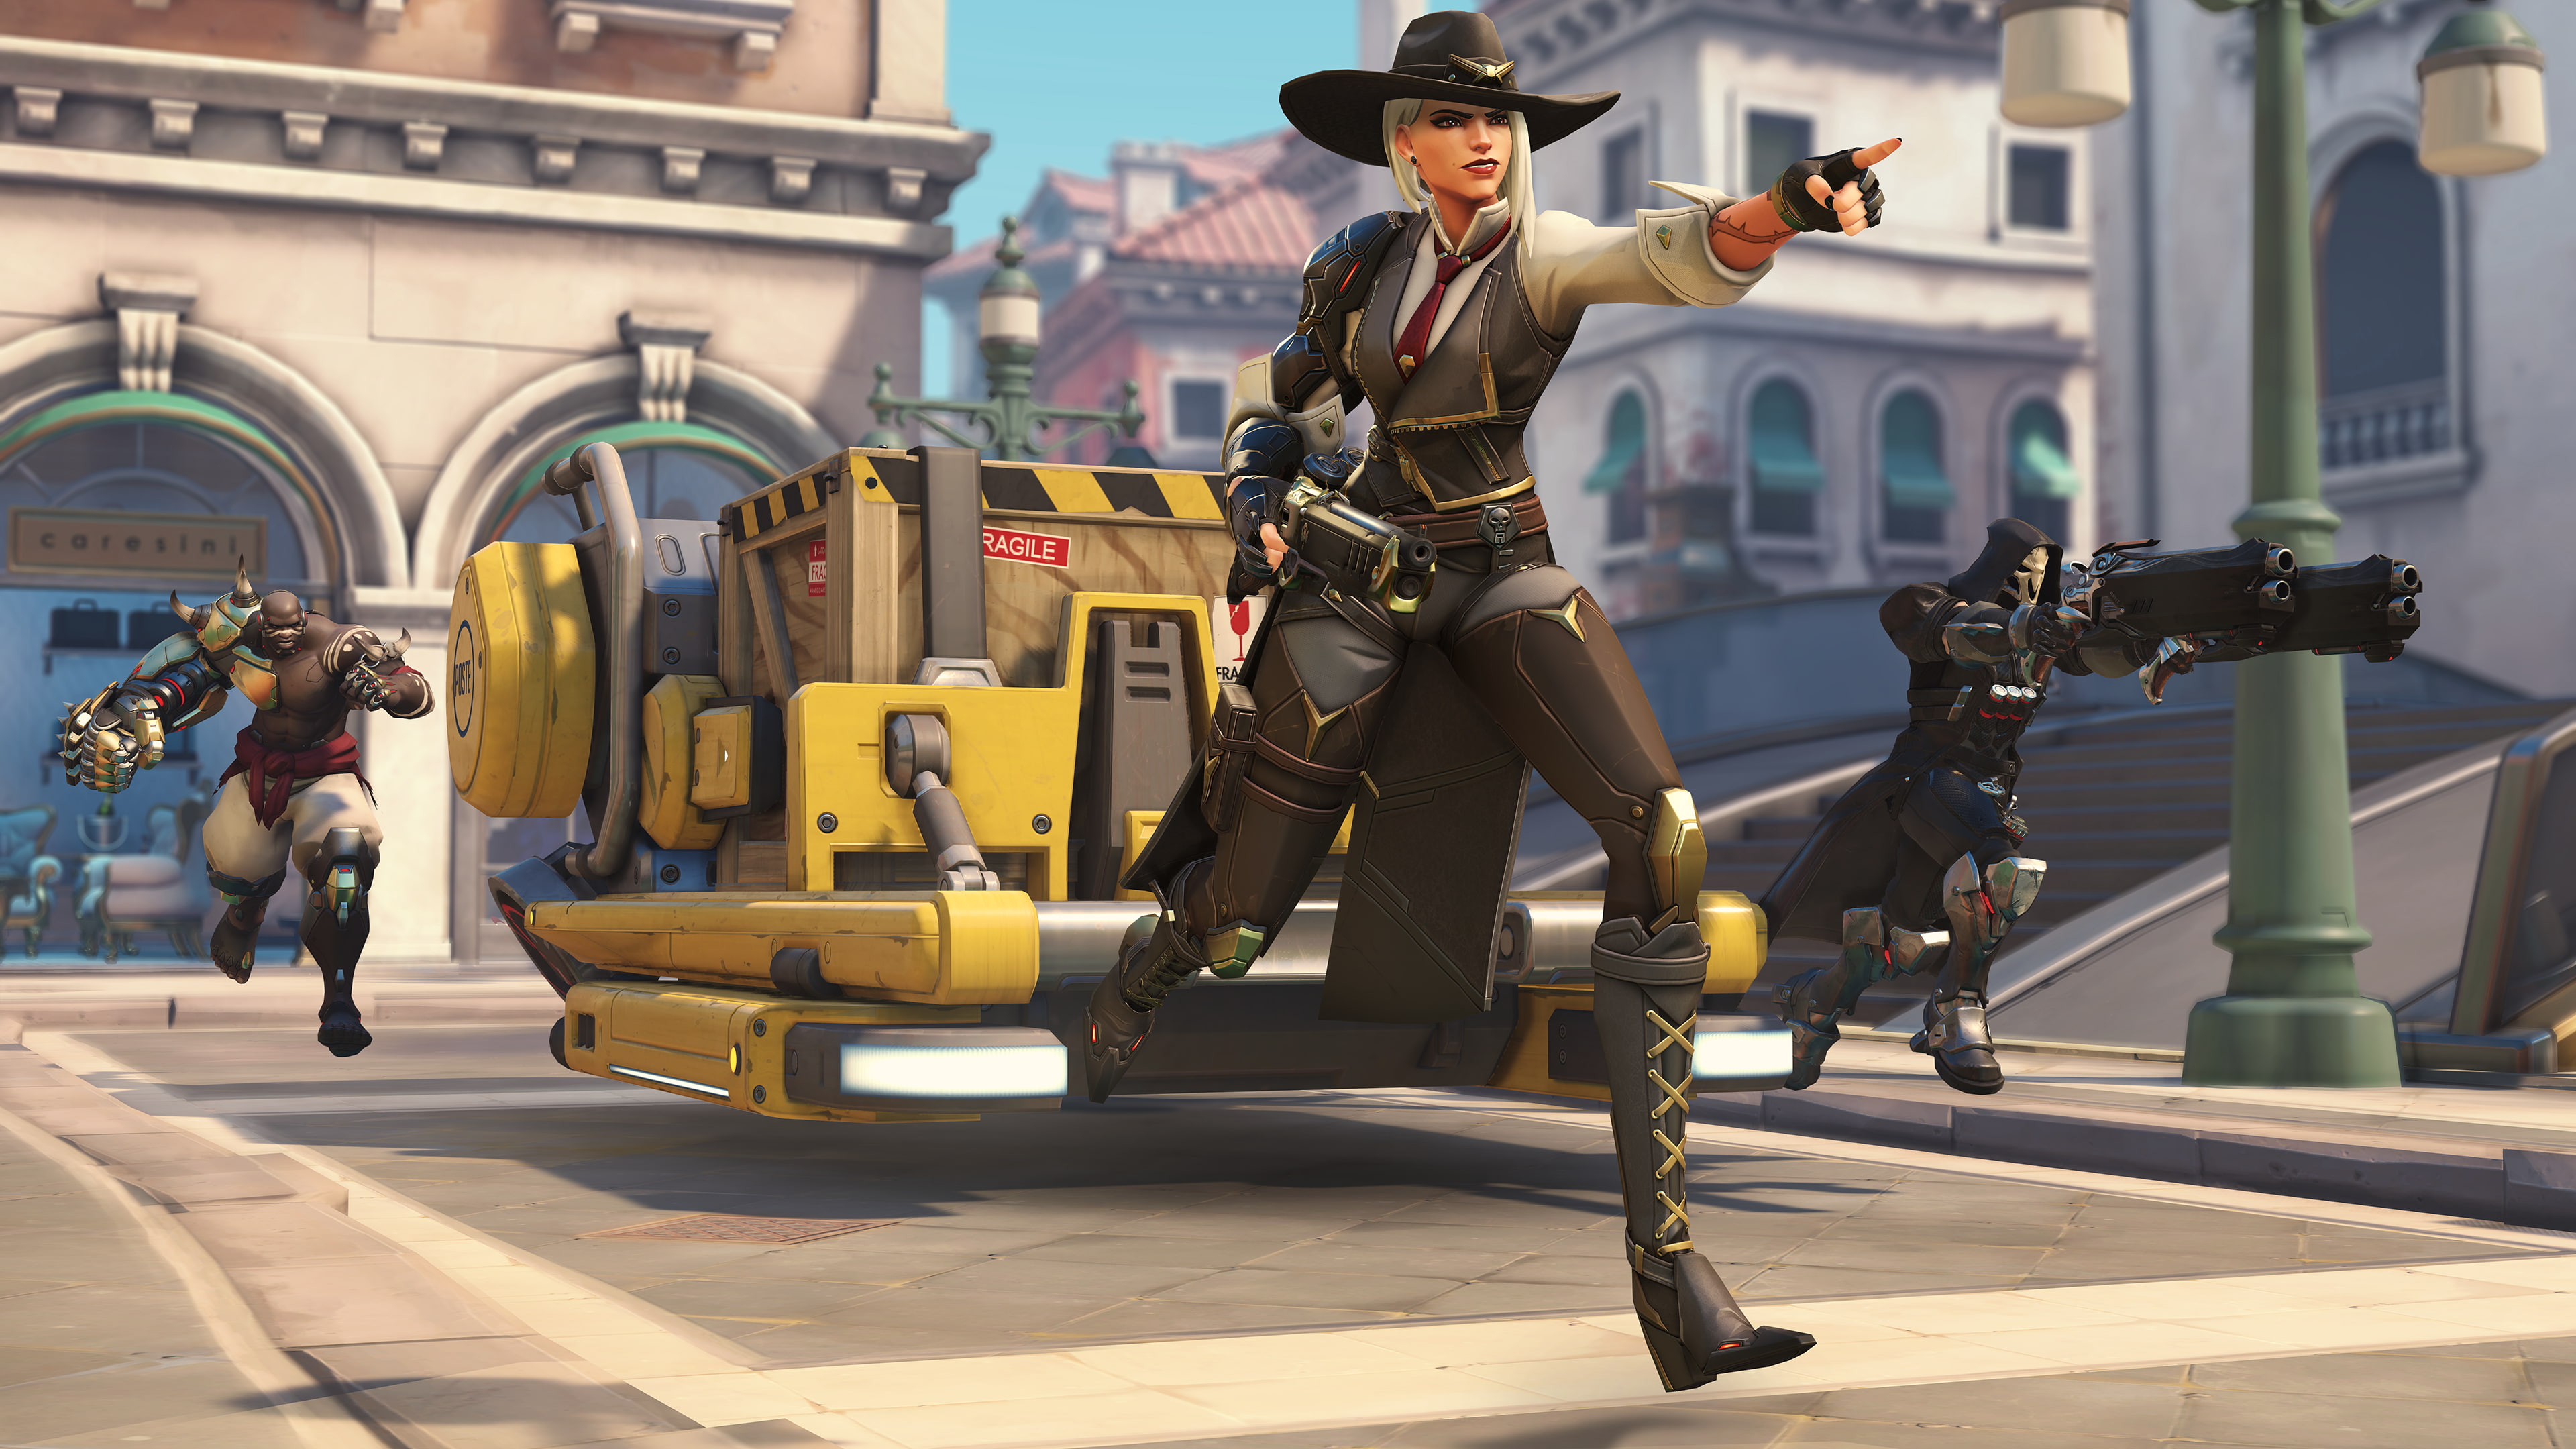 Overwatch Ashe In Game - HD Wallpaper 